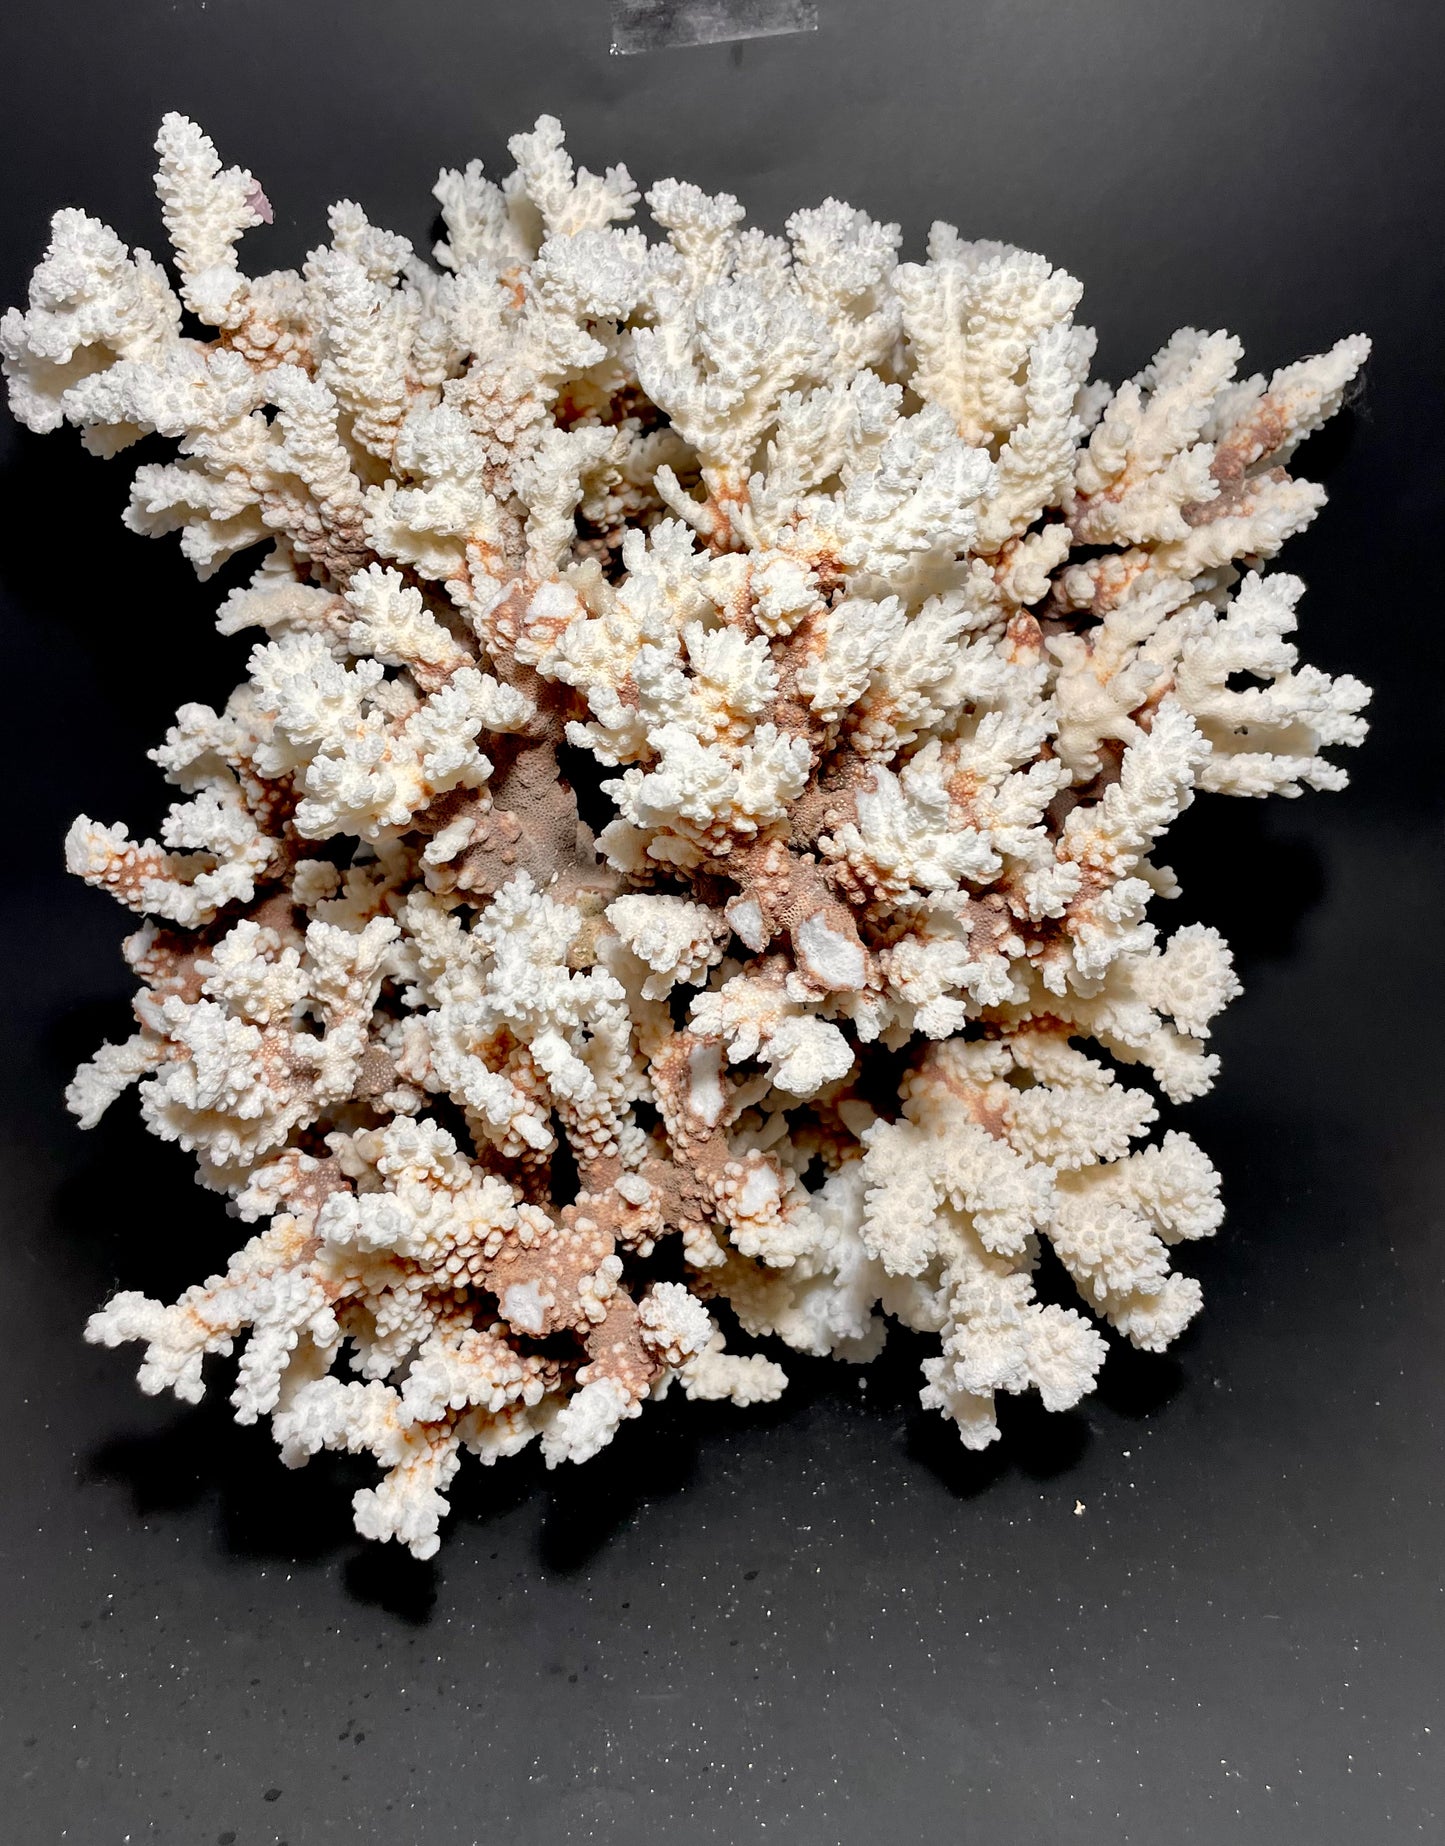 Brownstem Coral 16”x16”x15” (20 lbs) - Treasures from Beneath